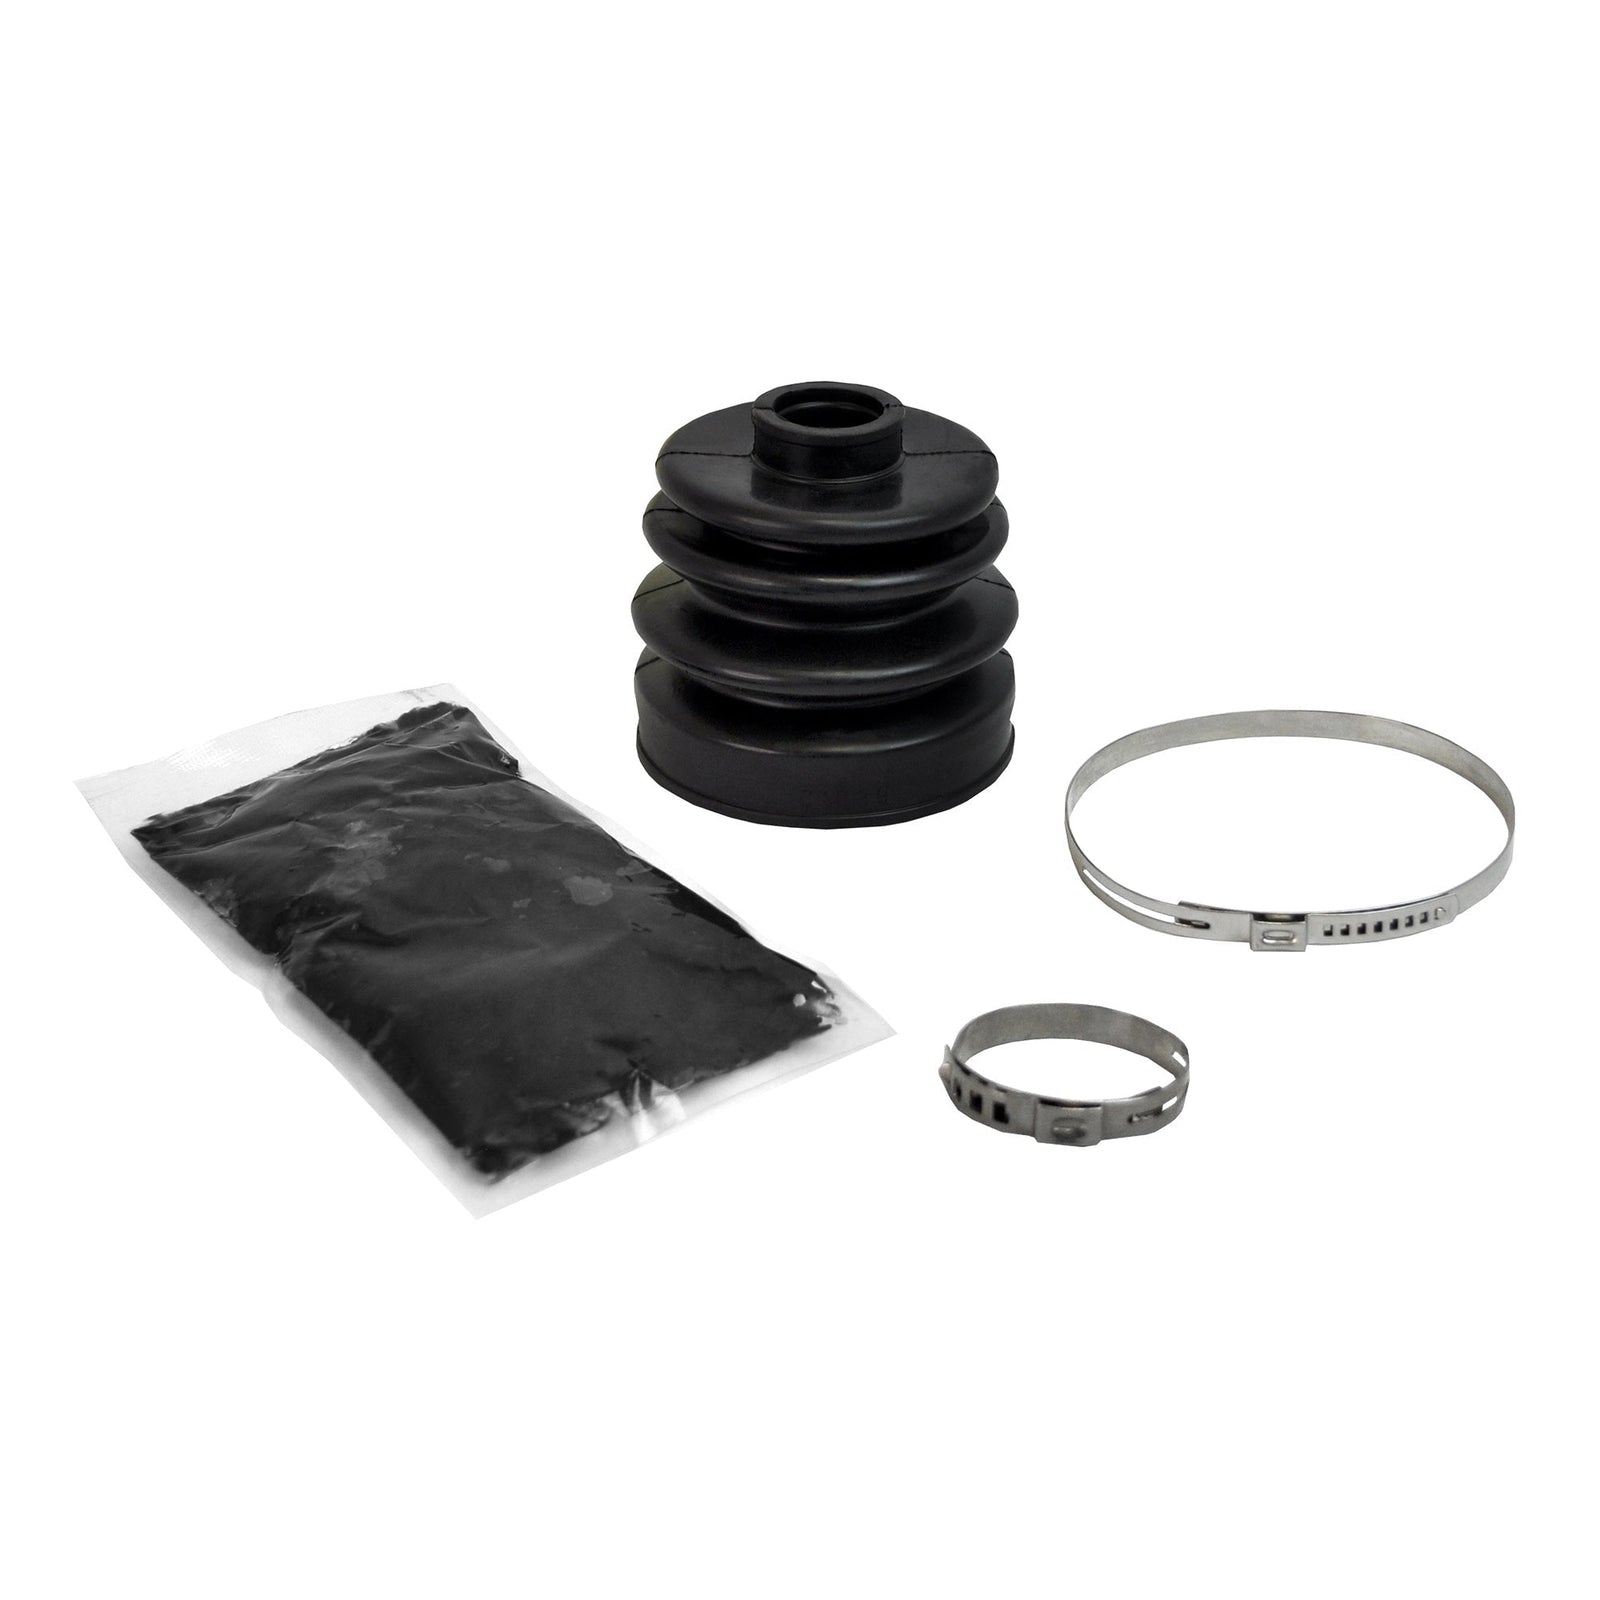 Arctic Cat Prowler 700 Rugged OE Replacement Boot Kit